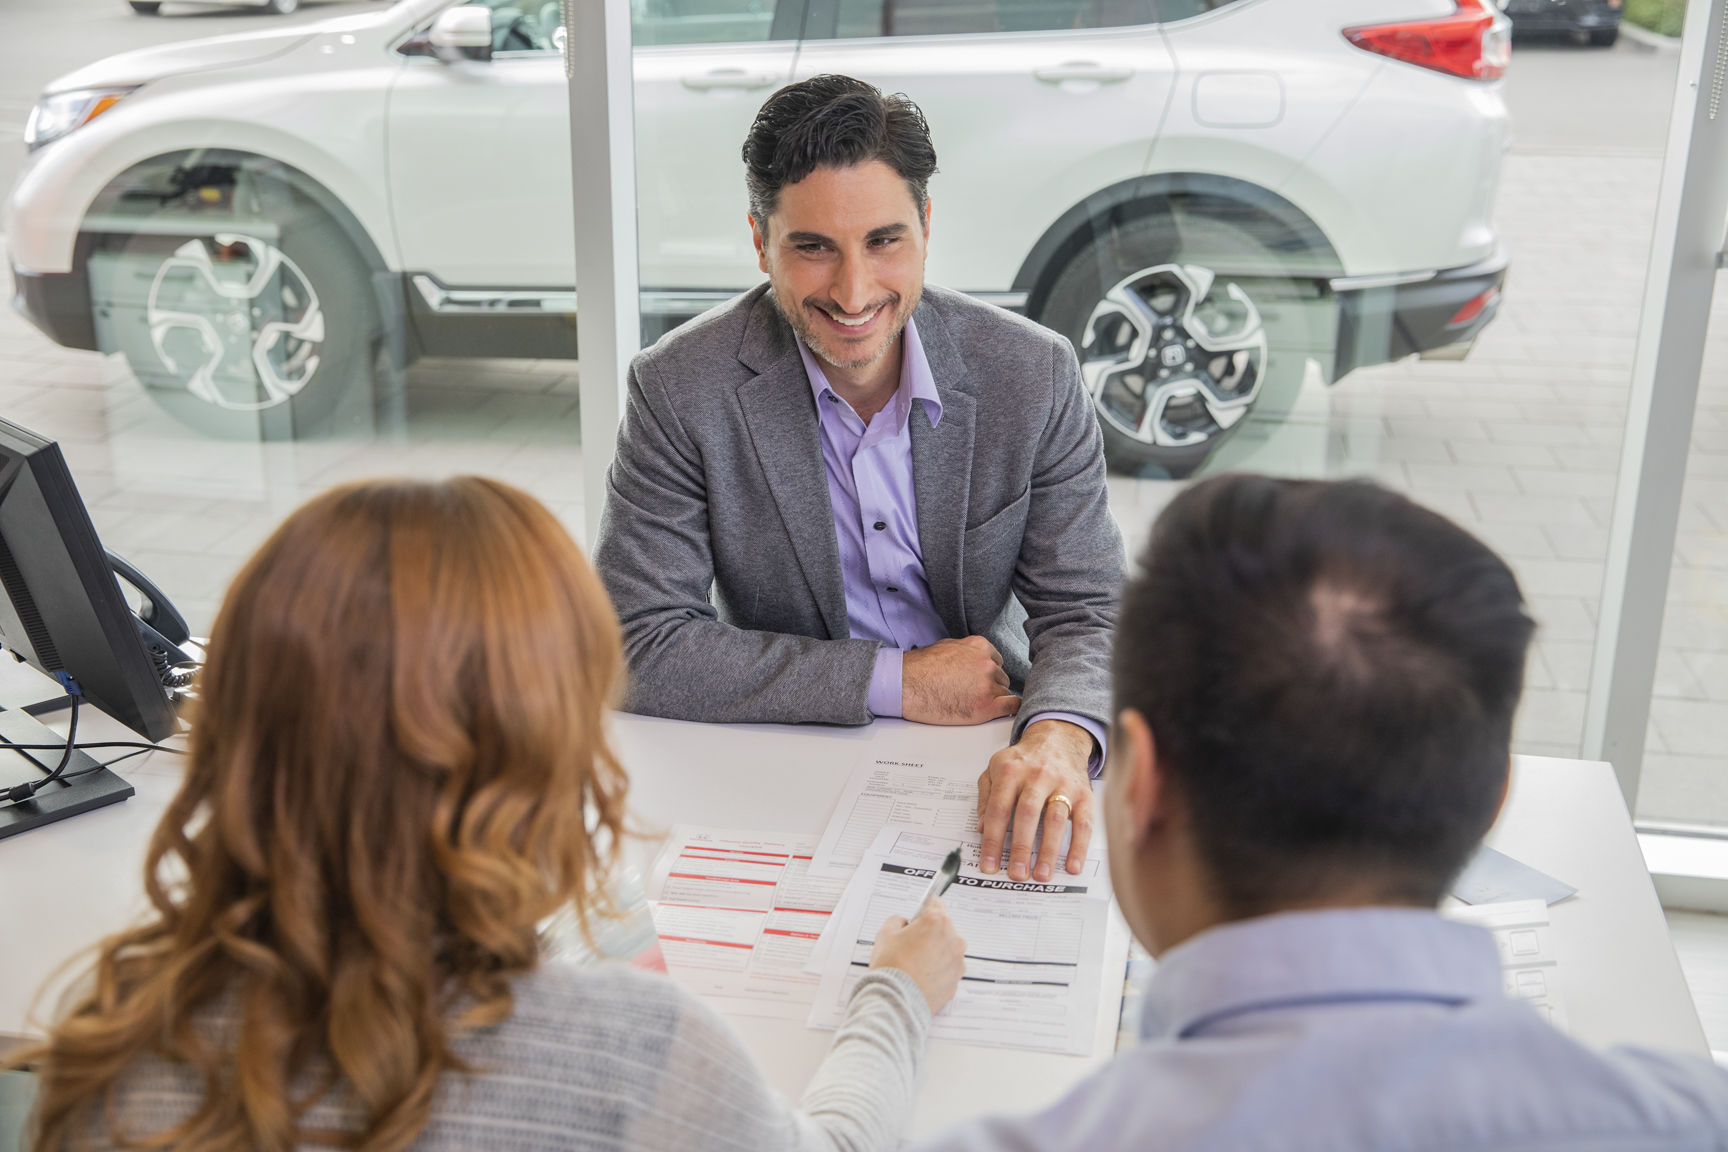 To Lease or Buy Your Vehicle?